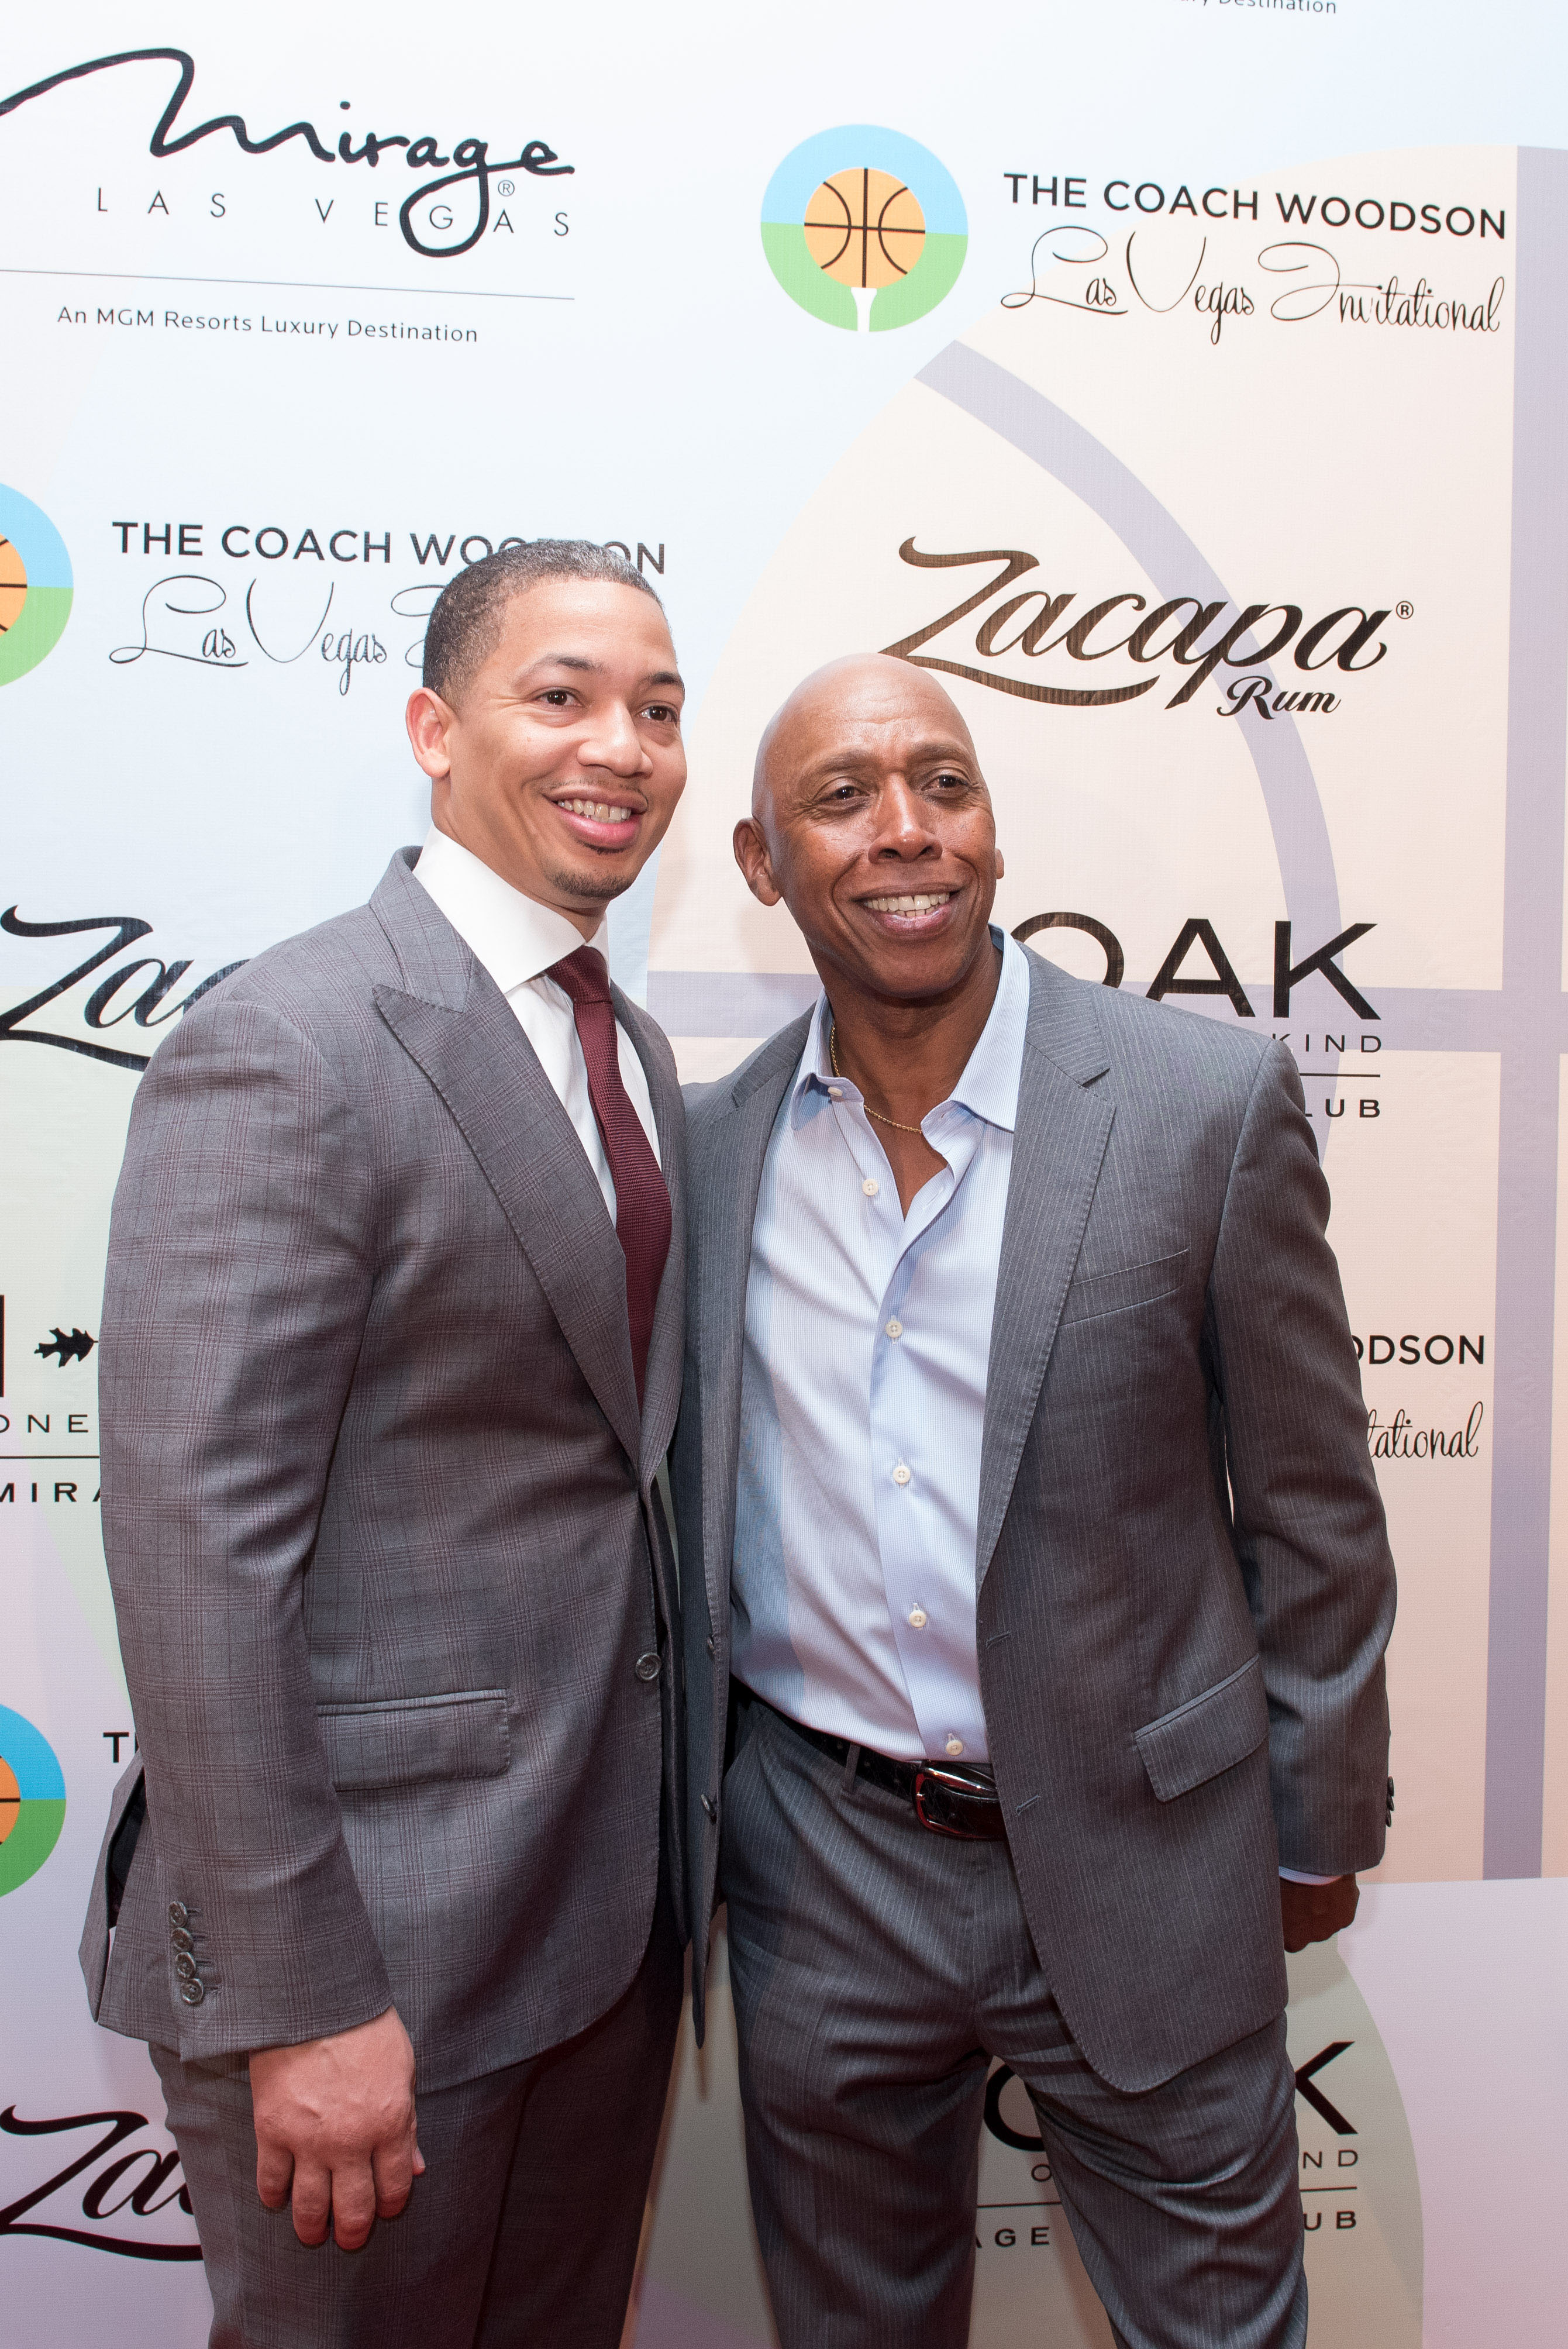 2016 Championship Head Coach of The Cleveland Cavaliers Tyronn Lue and R&B Icon Jeffrey Osborne walk the Woodson Red Carpet at 1 OAK inside The Mirage Hotel & Casino in Las Vegas